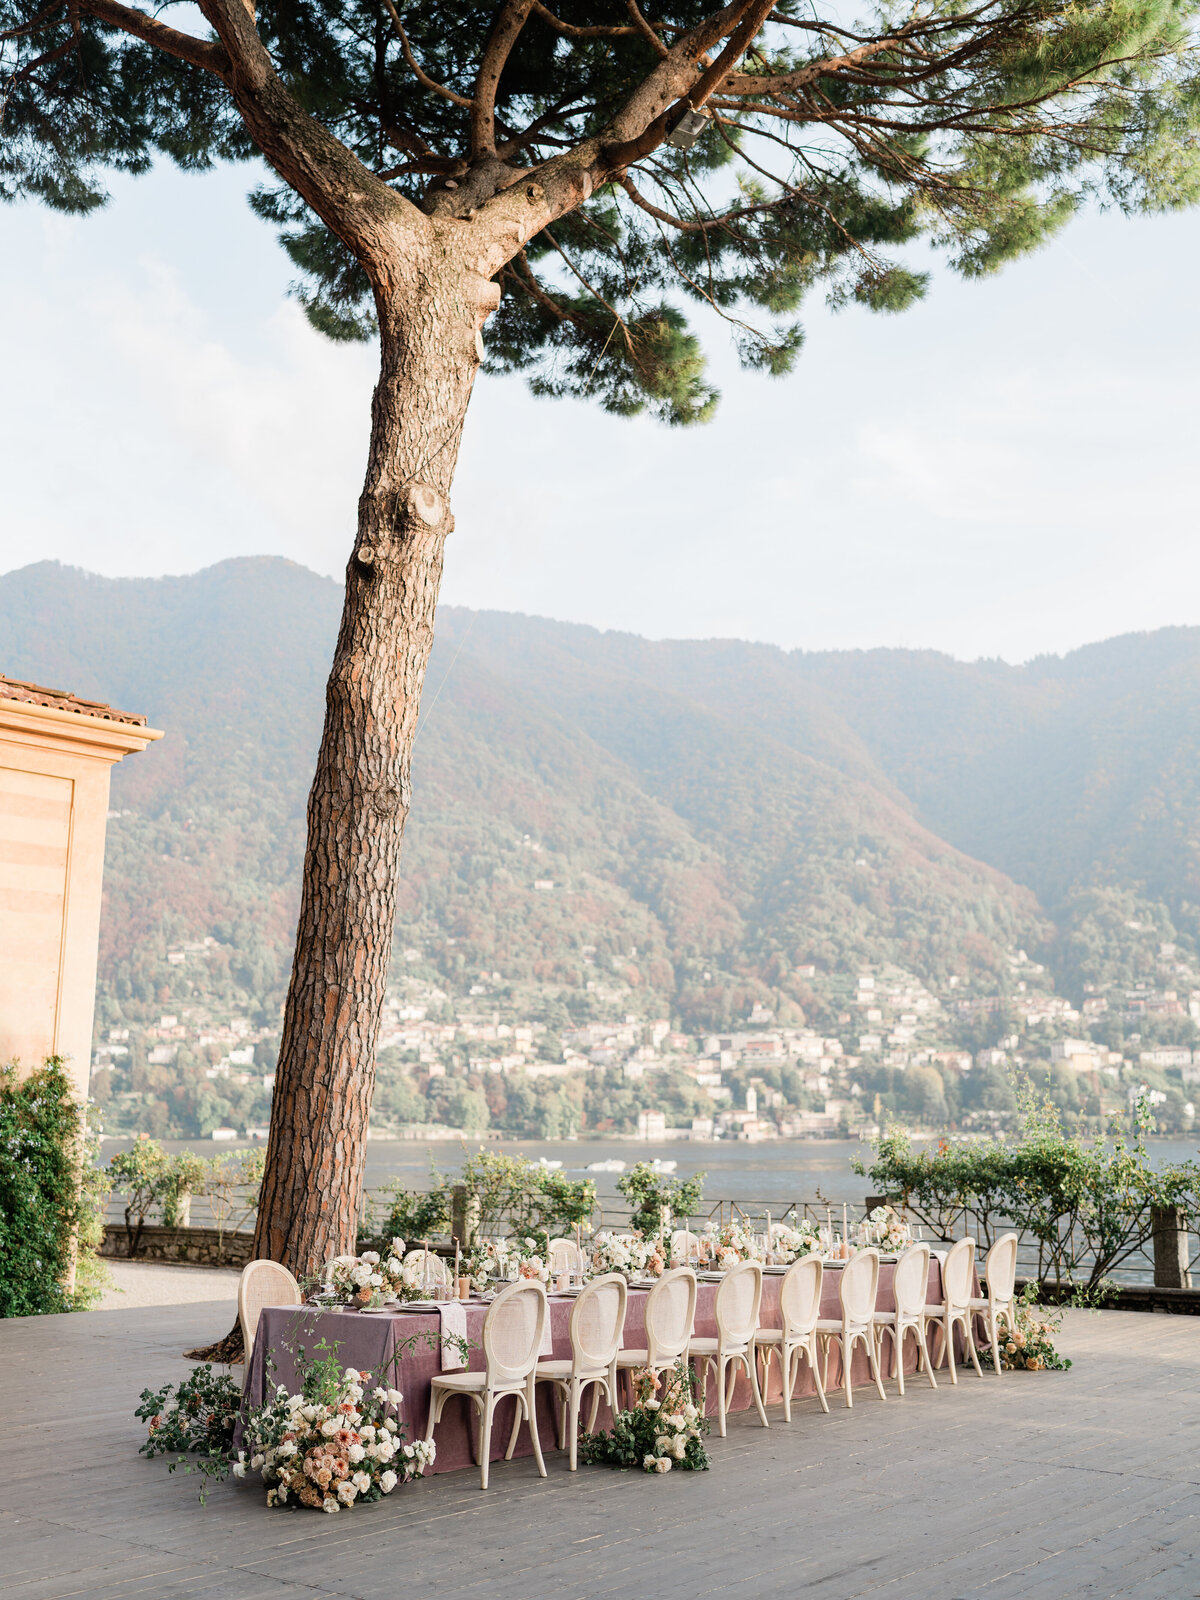 Liz Andolina Photography Destination Wedding Photographer in Italy, New York, Across the East Coast Editorial, heritage-quality images for stylish couples Villa Pizzo Editorial-Liz Andolina Photography-391